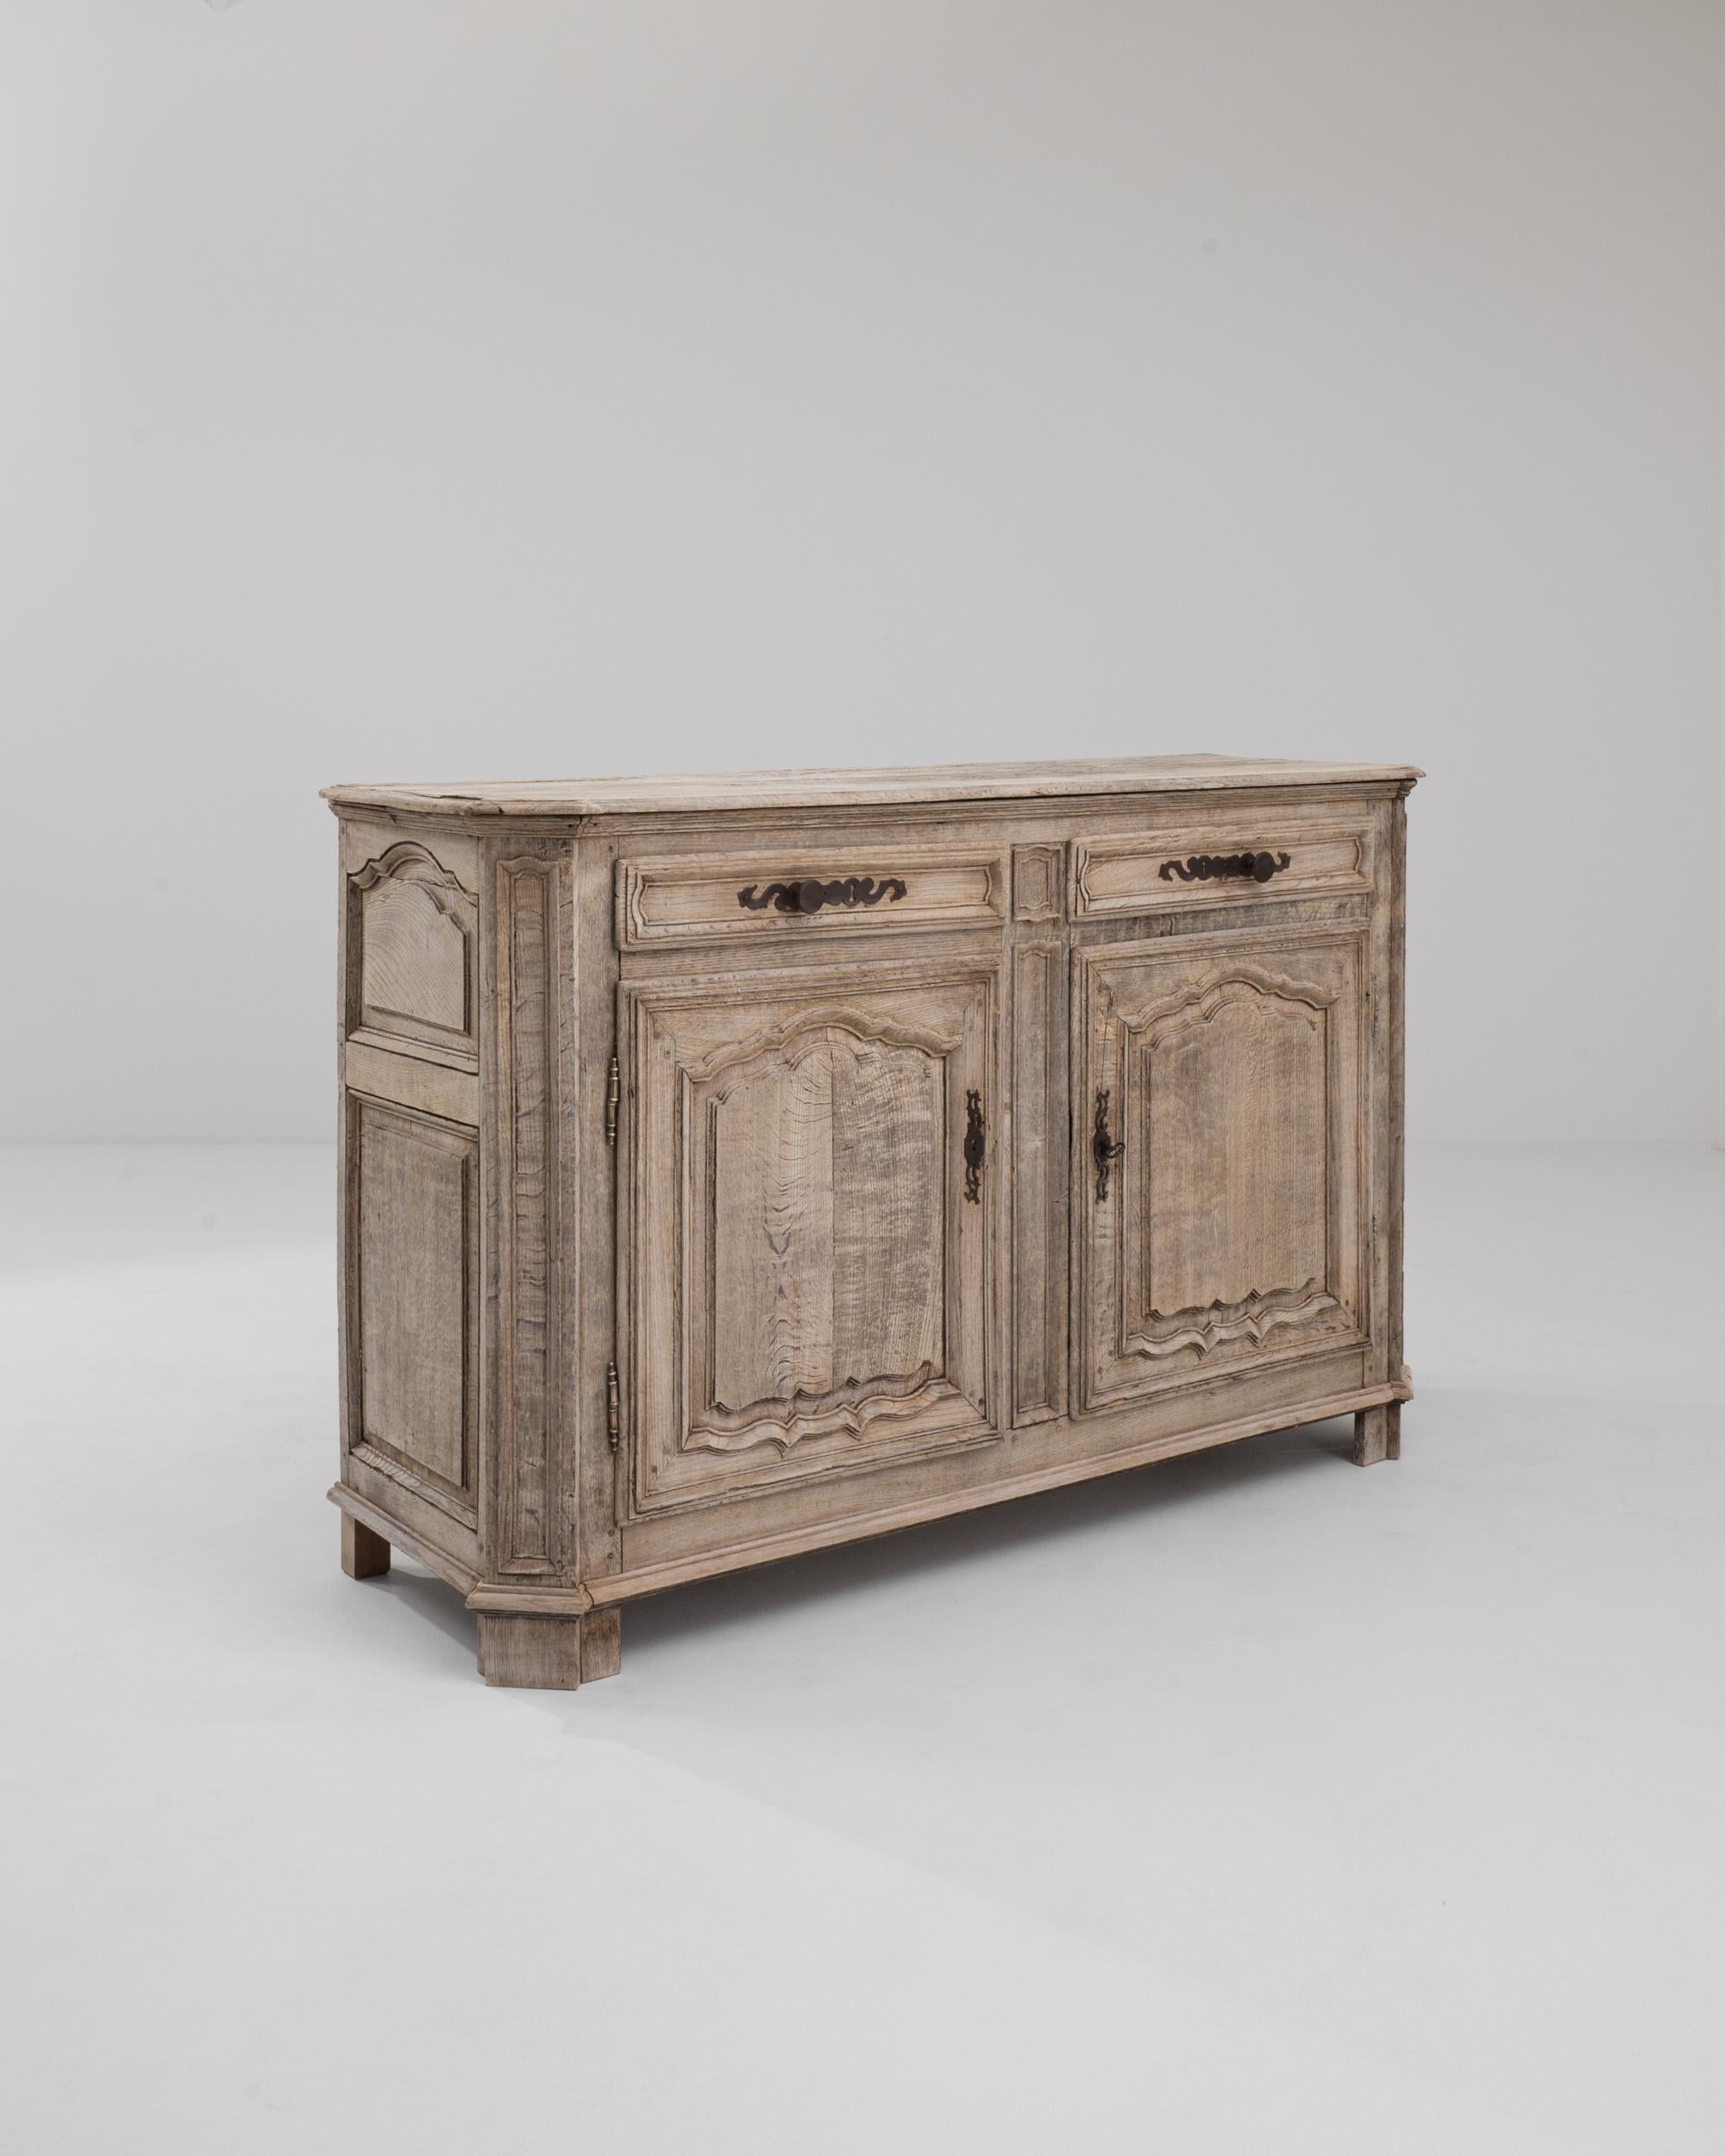 A wooden buffet made in 20th century Belgium. This large buffet features two doors and two drawers. The oak has been carefully refinished to protect the wood surface and also bring fresh luster to the natural material. The lightly patinated oak